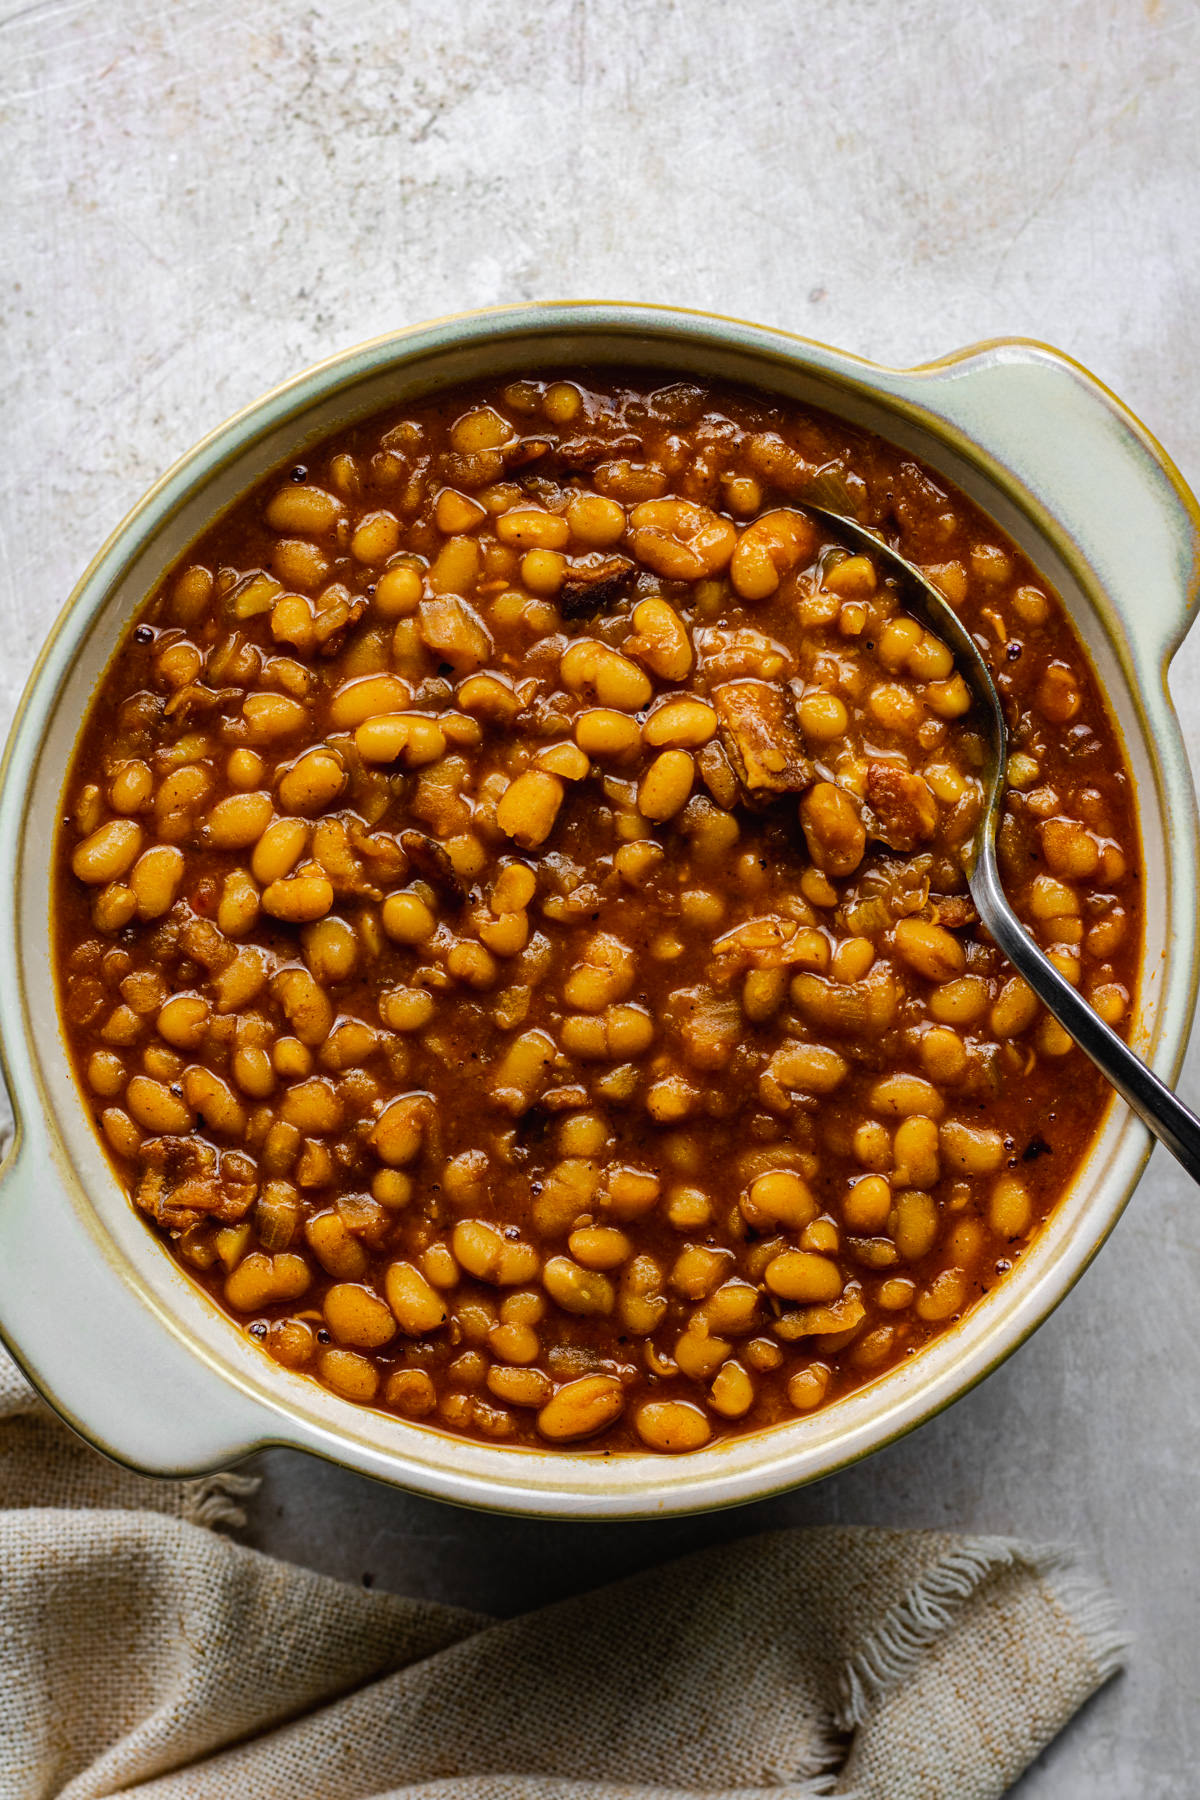 Baked beans recipe from scratch in a serving bowl